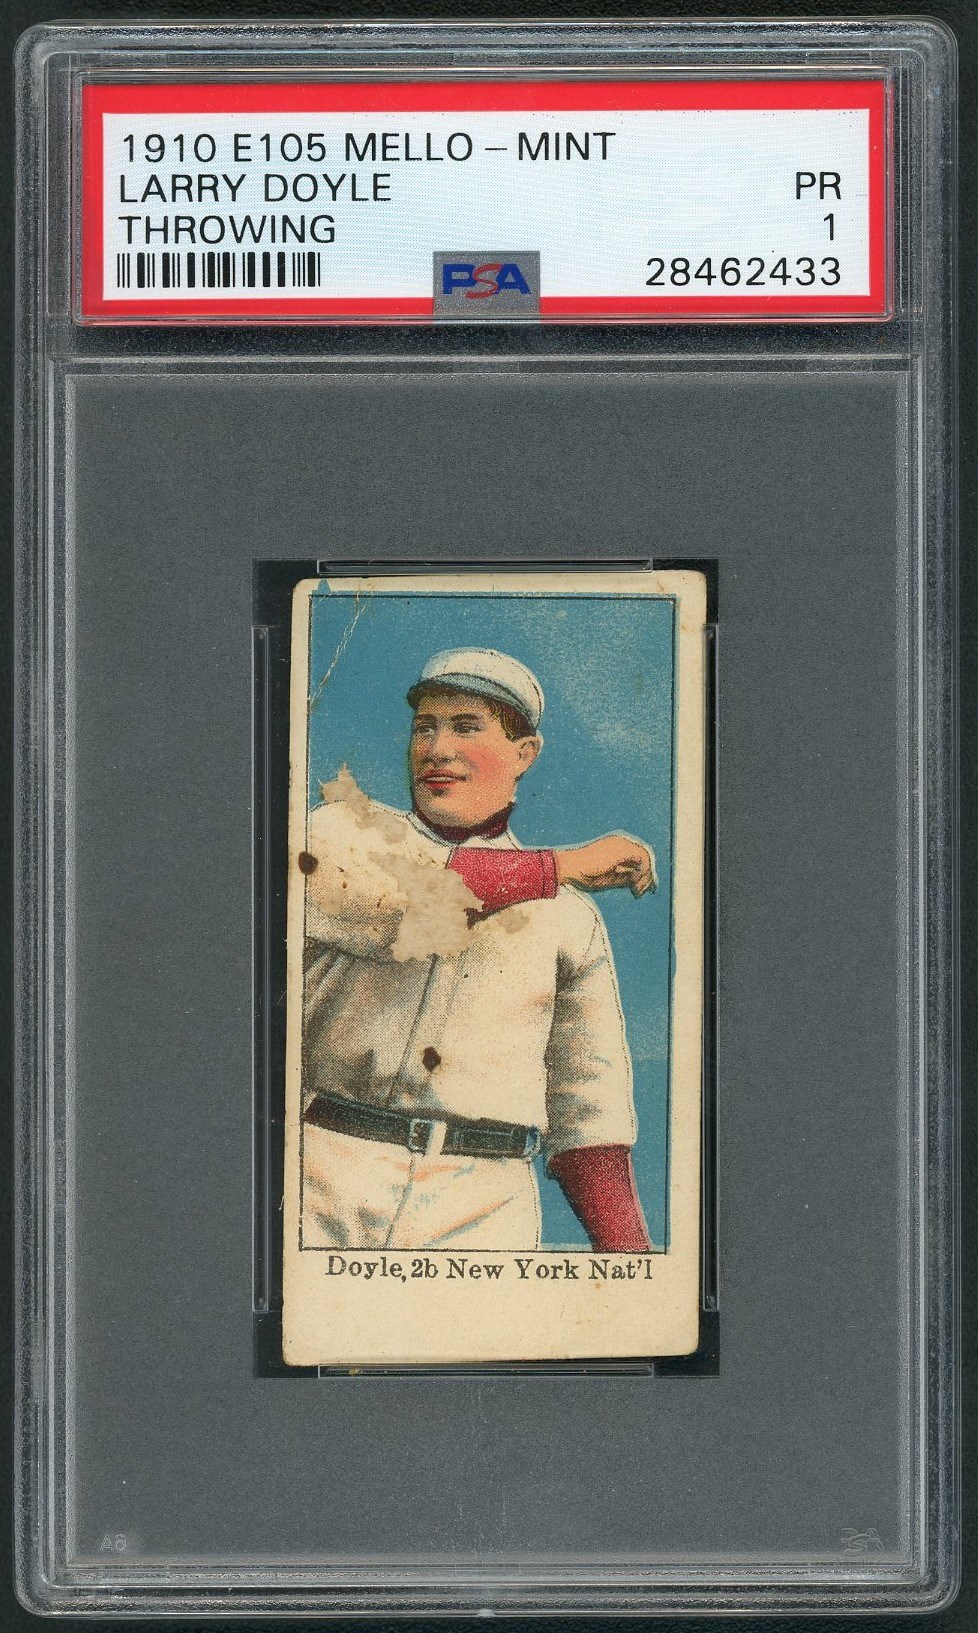 Baseball and Trading Cards - 1910 E105 Mello-Mint Larry Doyle (Throwing) - PSA PR 1